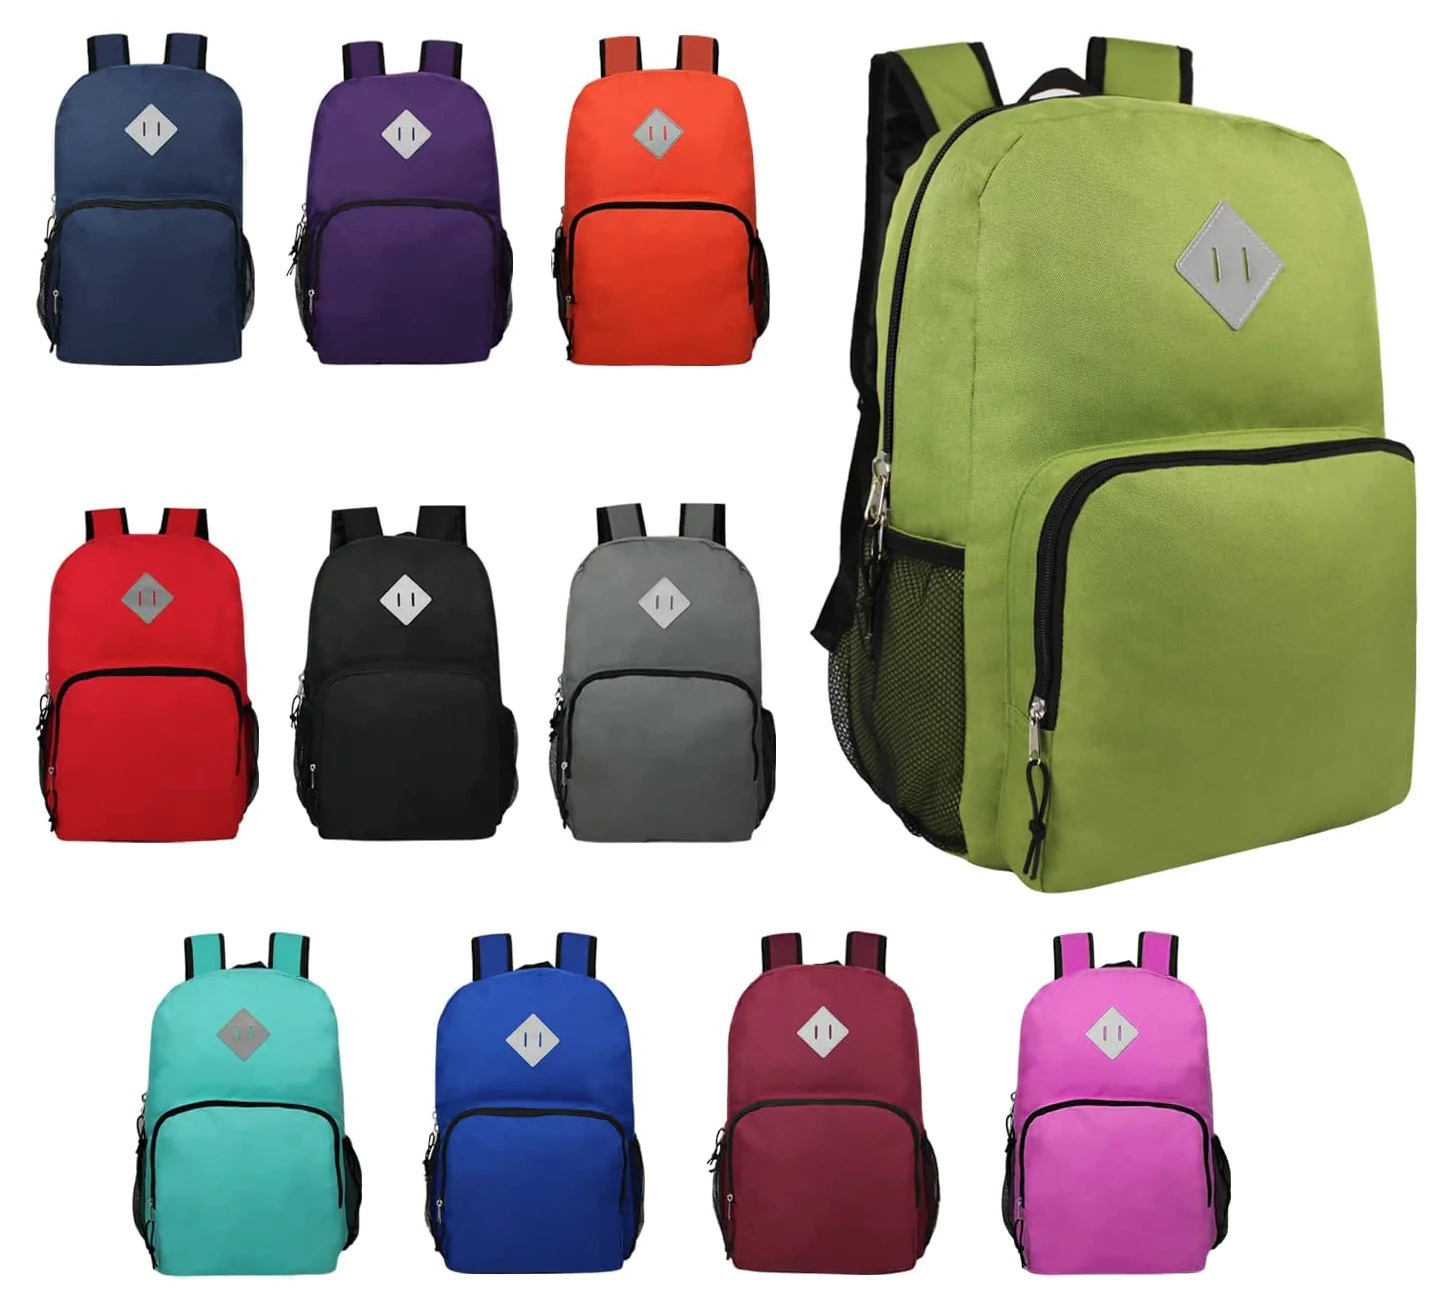 Wholesale 18" Classic Backpacks in Assorted Colors DollarDays